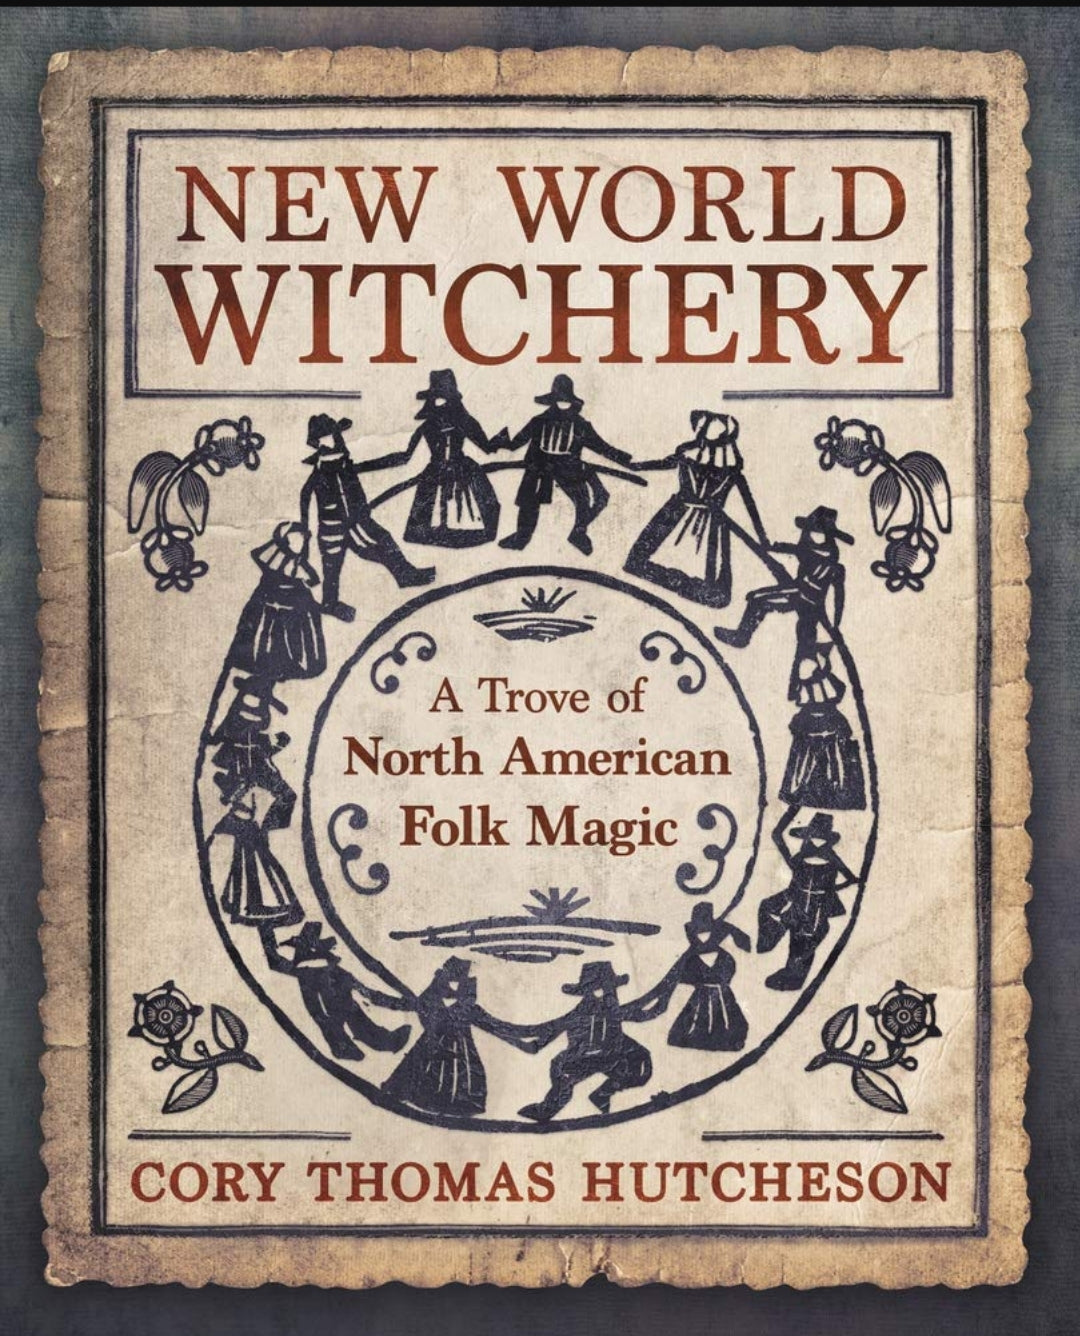 New World Witchery: A Trove of North American Folk Magic

by Cory Thomas Hutcheson AUTHOR